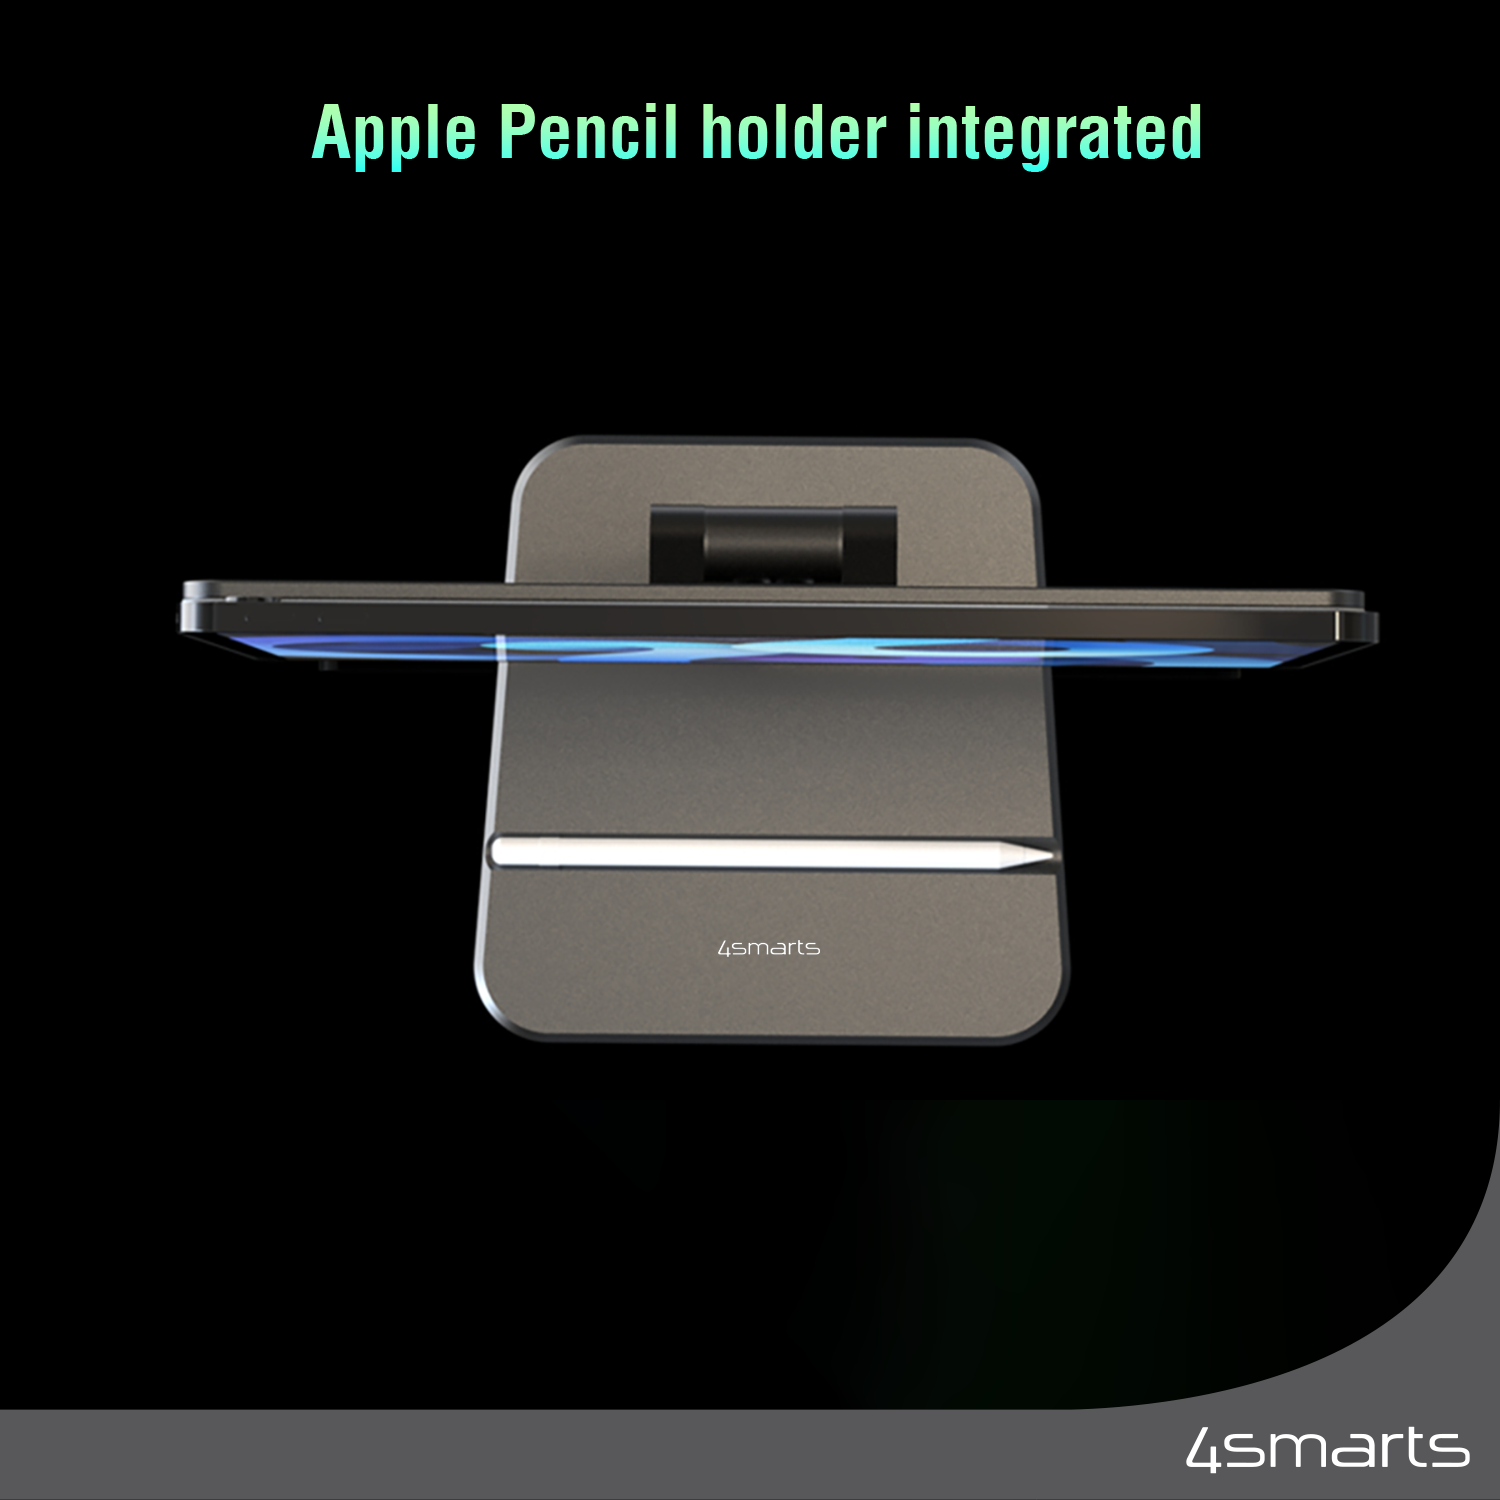 4smarts tablet holder for Apple iPad (10th generation) has an integrated Apple Pencil holder.